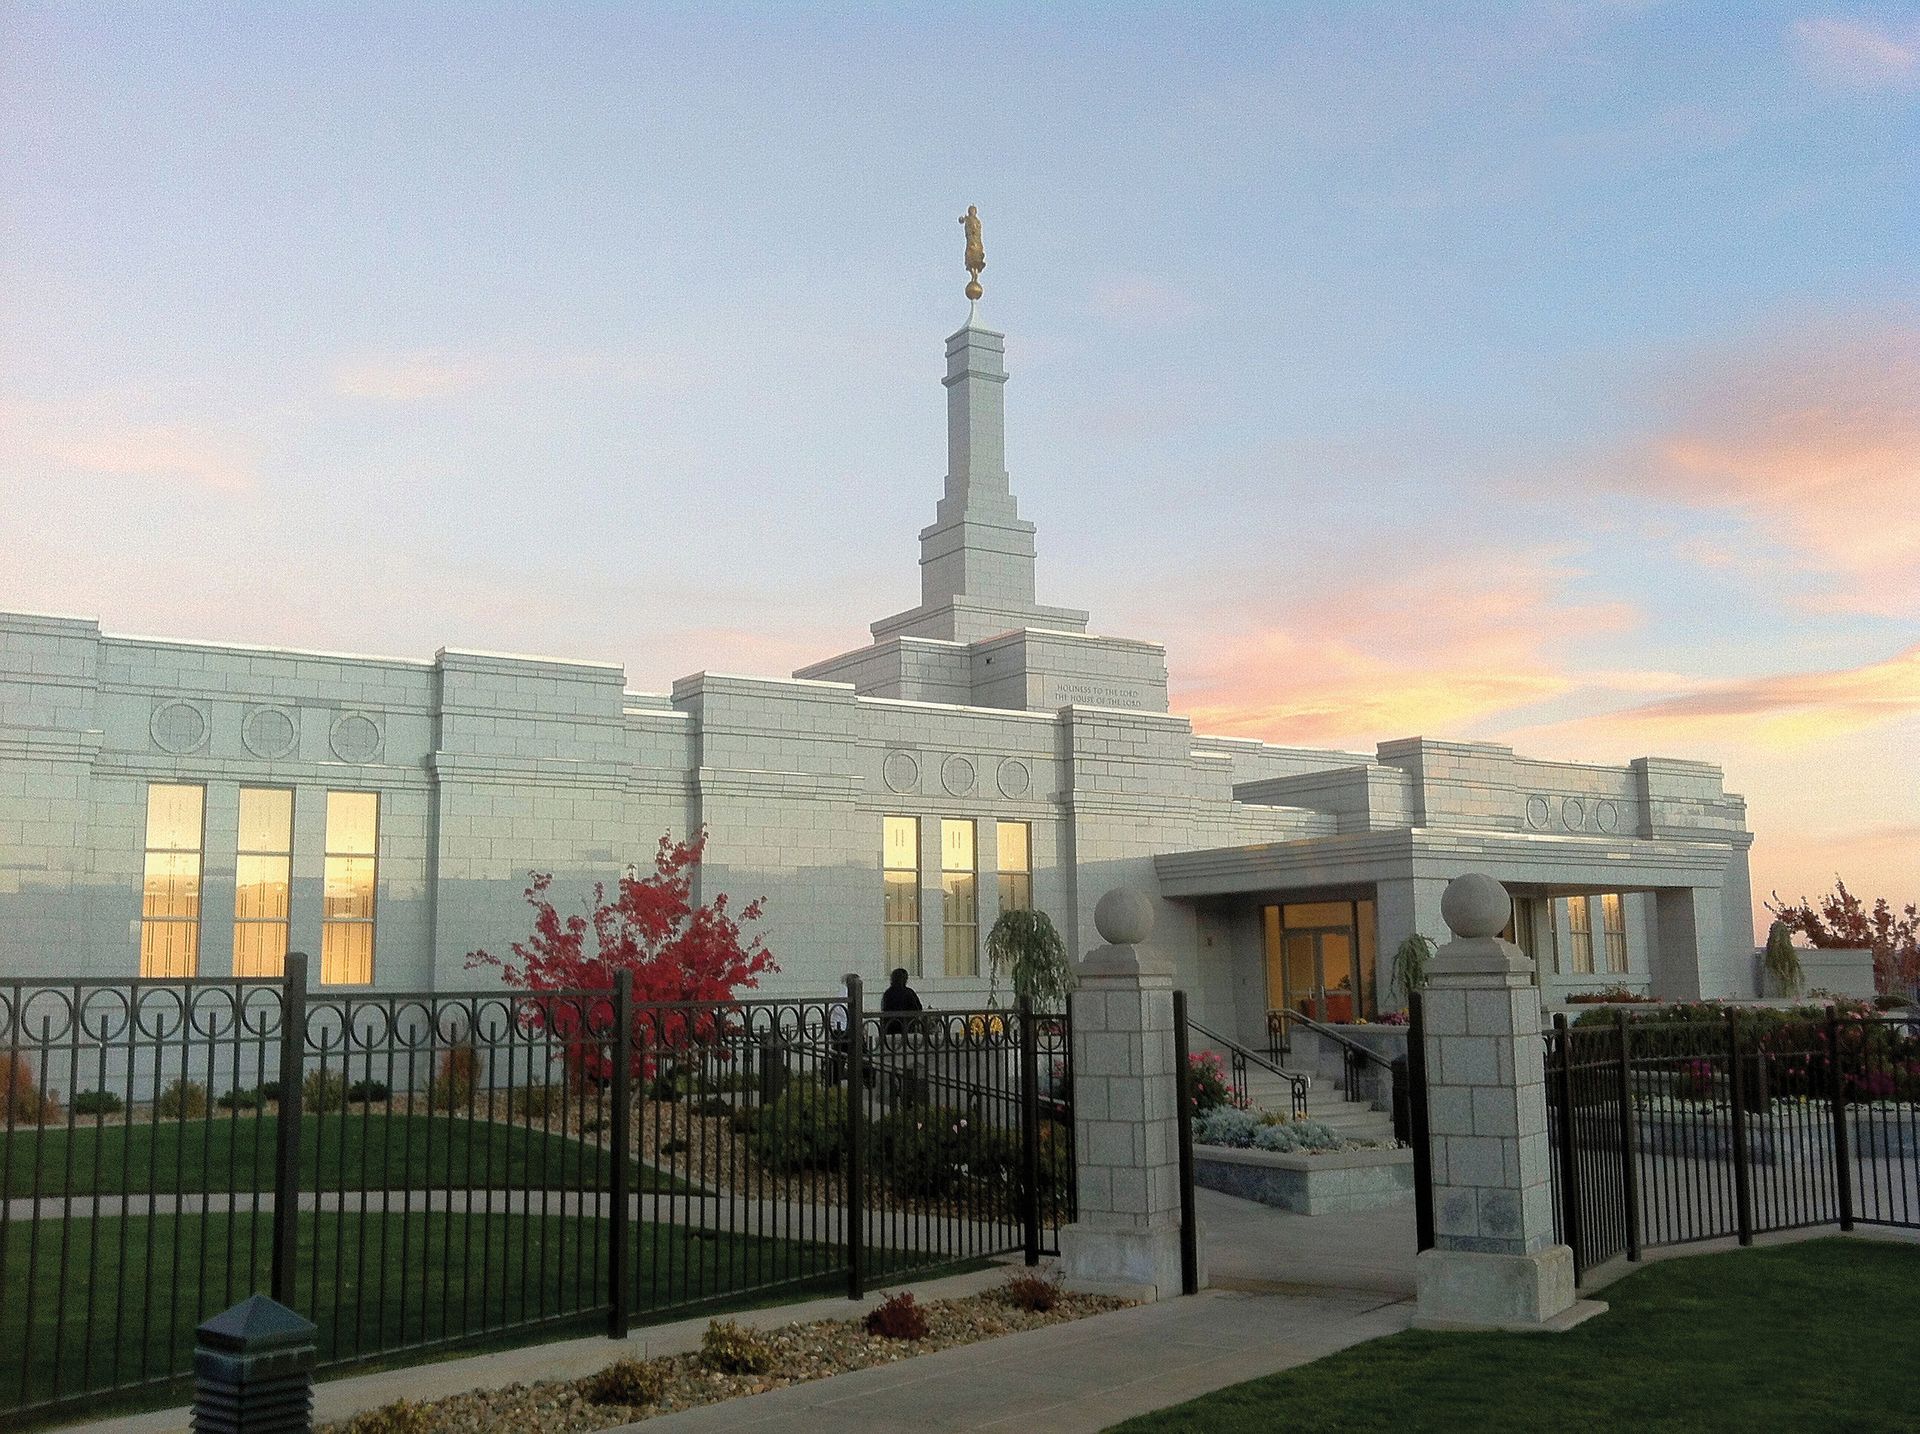 The Reno Nevada Temple, including the entrance, gates, and scenery.